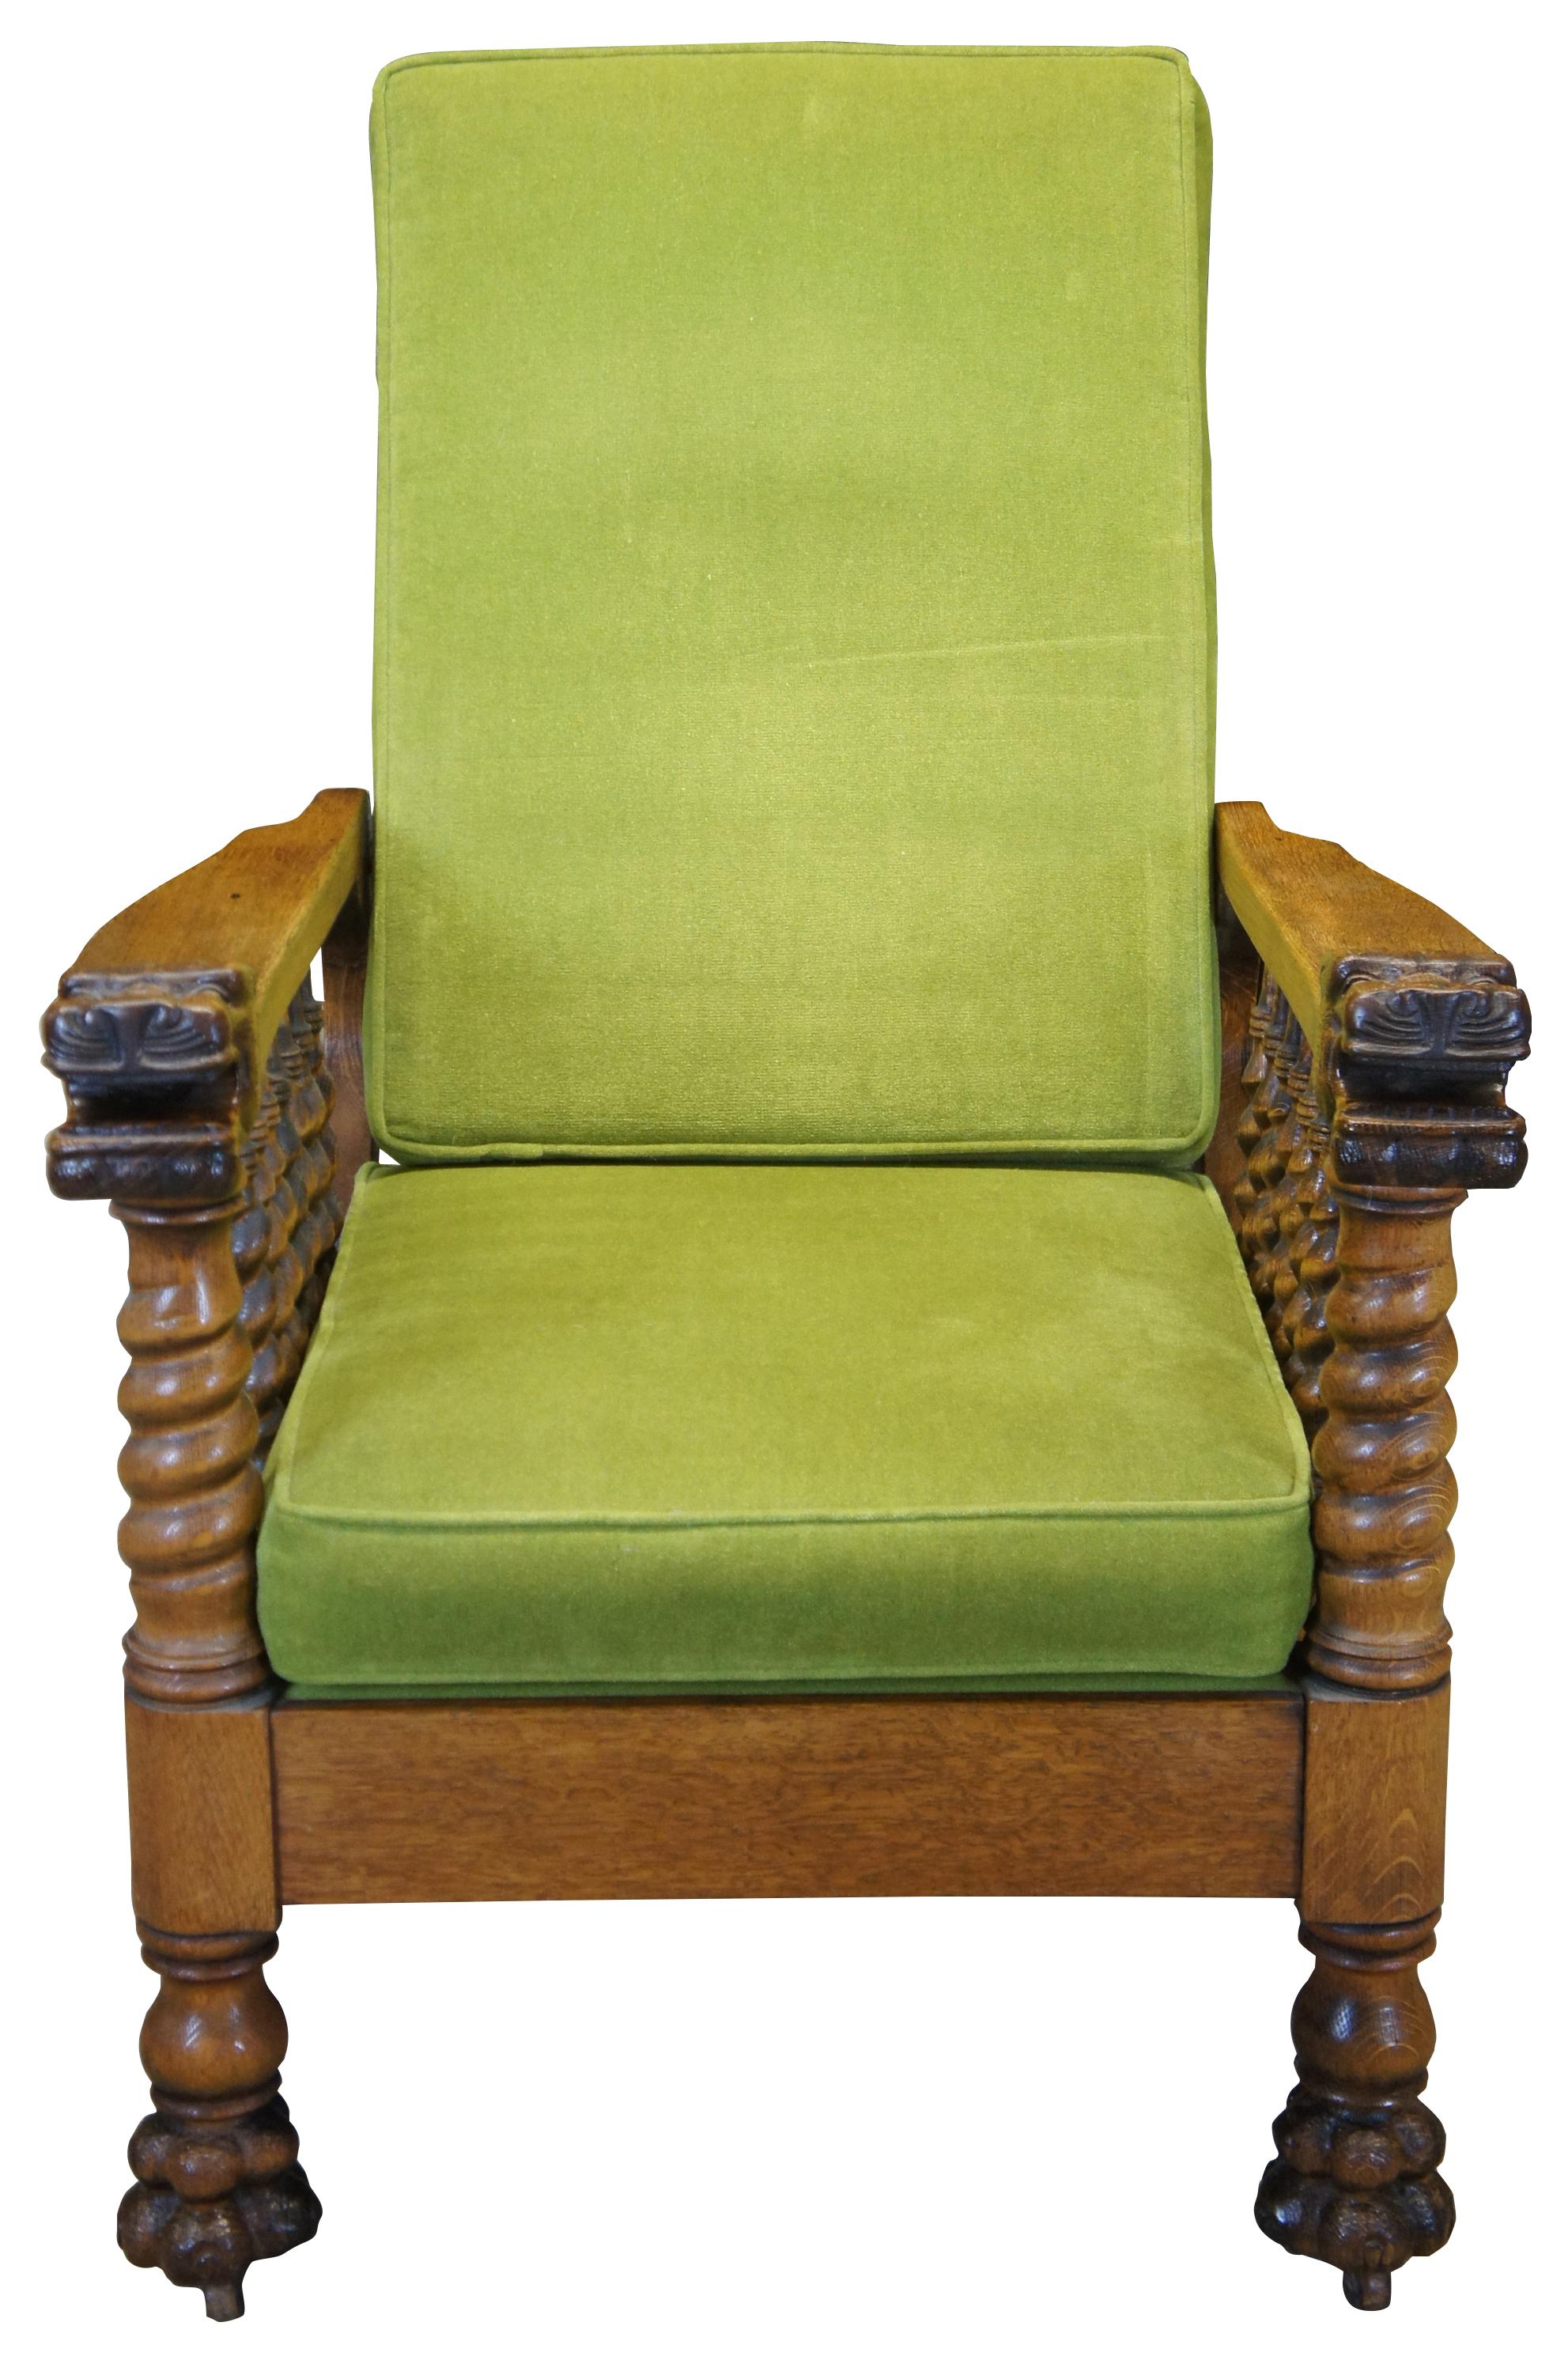 Late 19th century Victorian armchair. The Morris chair was known for its unique staged reclining mechanism. This beautiful example is made from oak with turned barley twist supports and figural lion head arms. Features lion paw feet with castors and